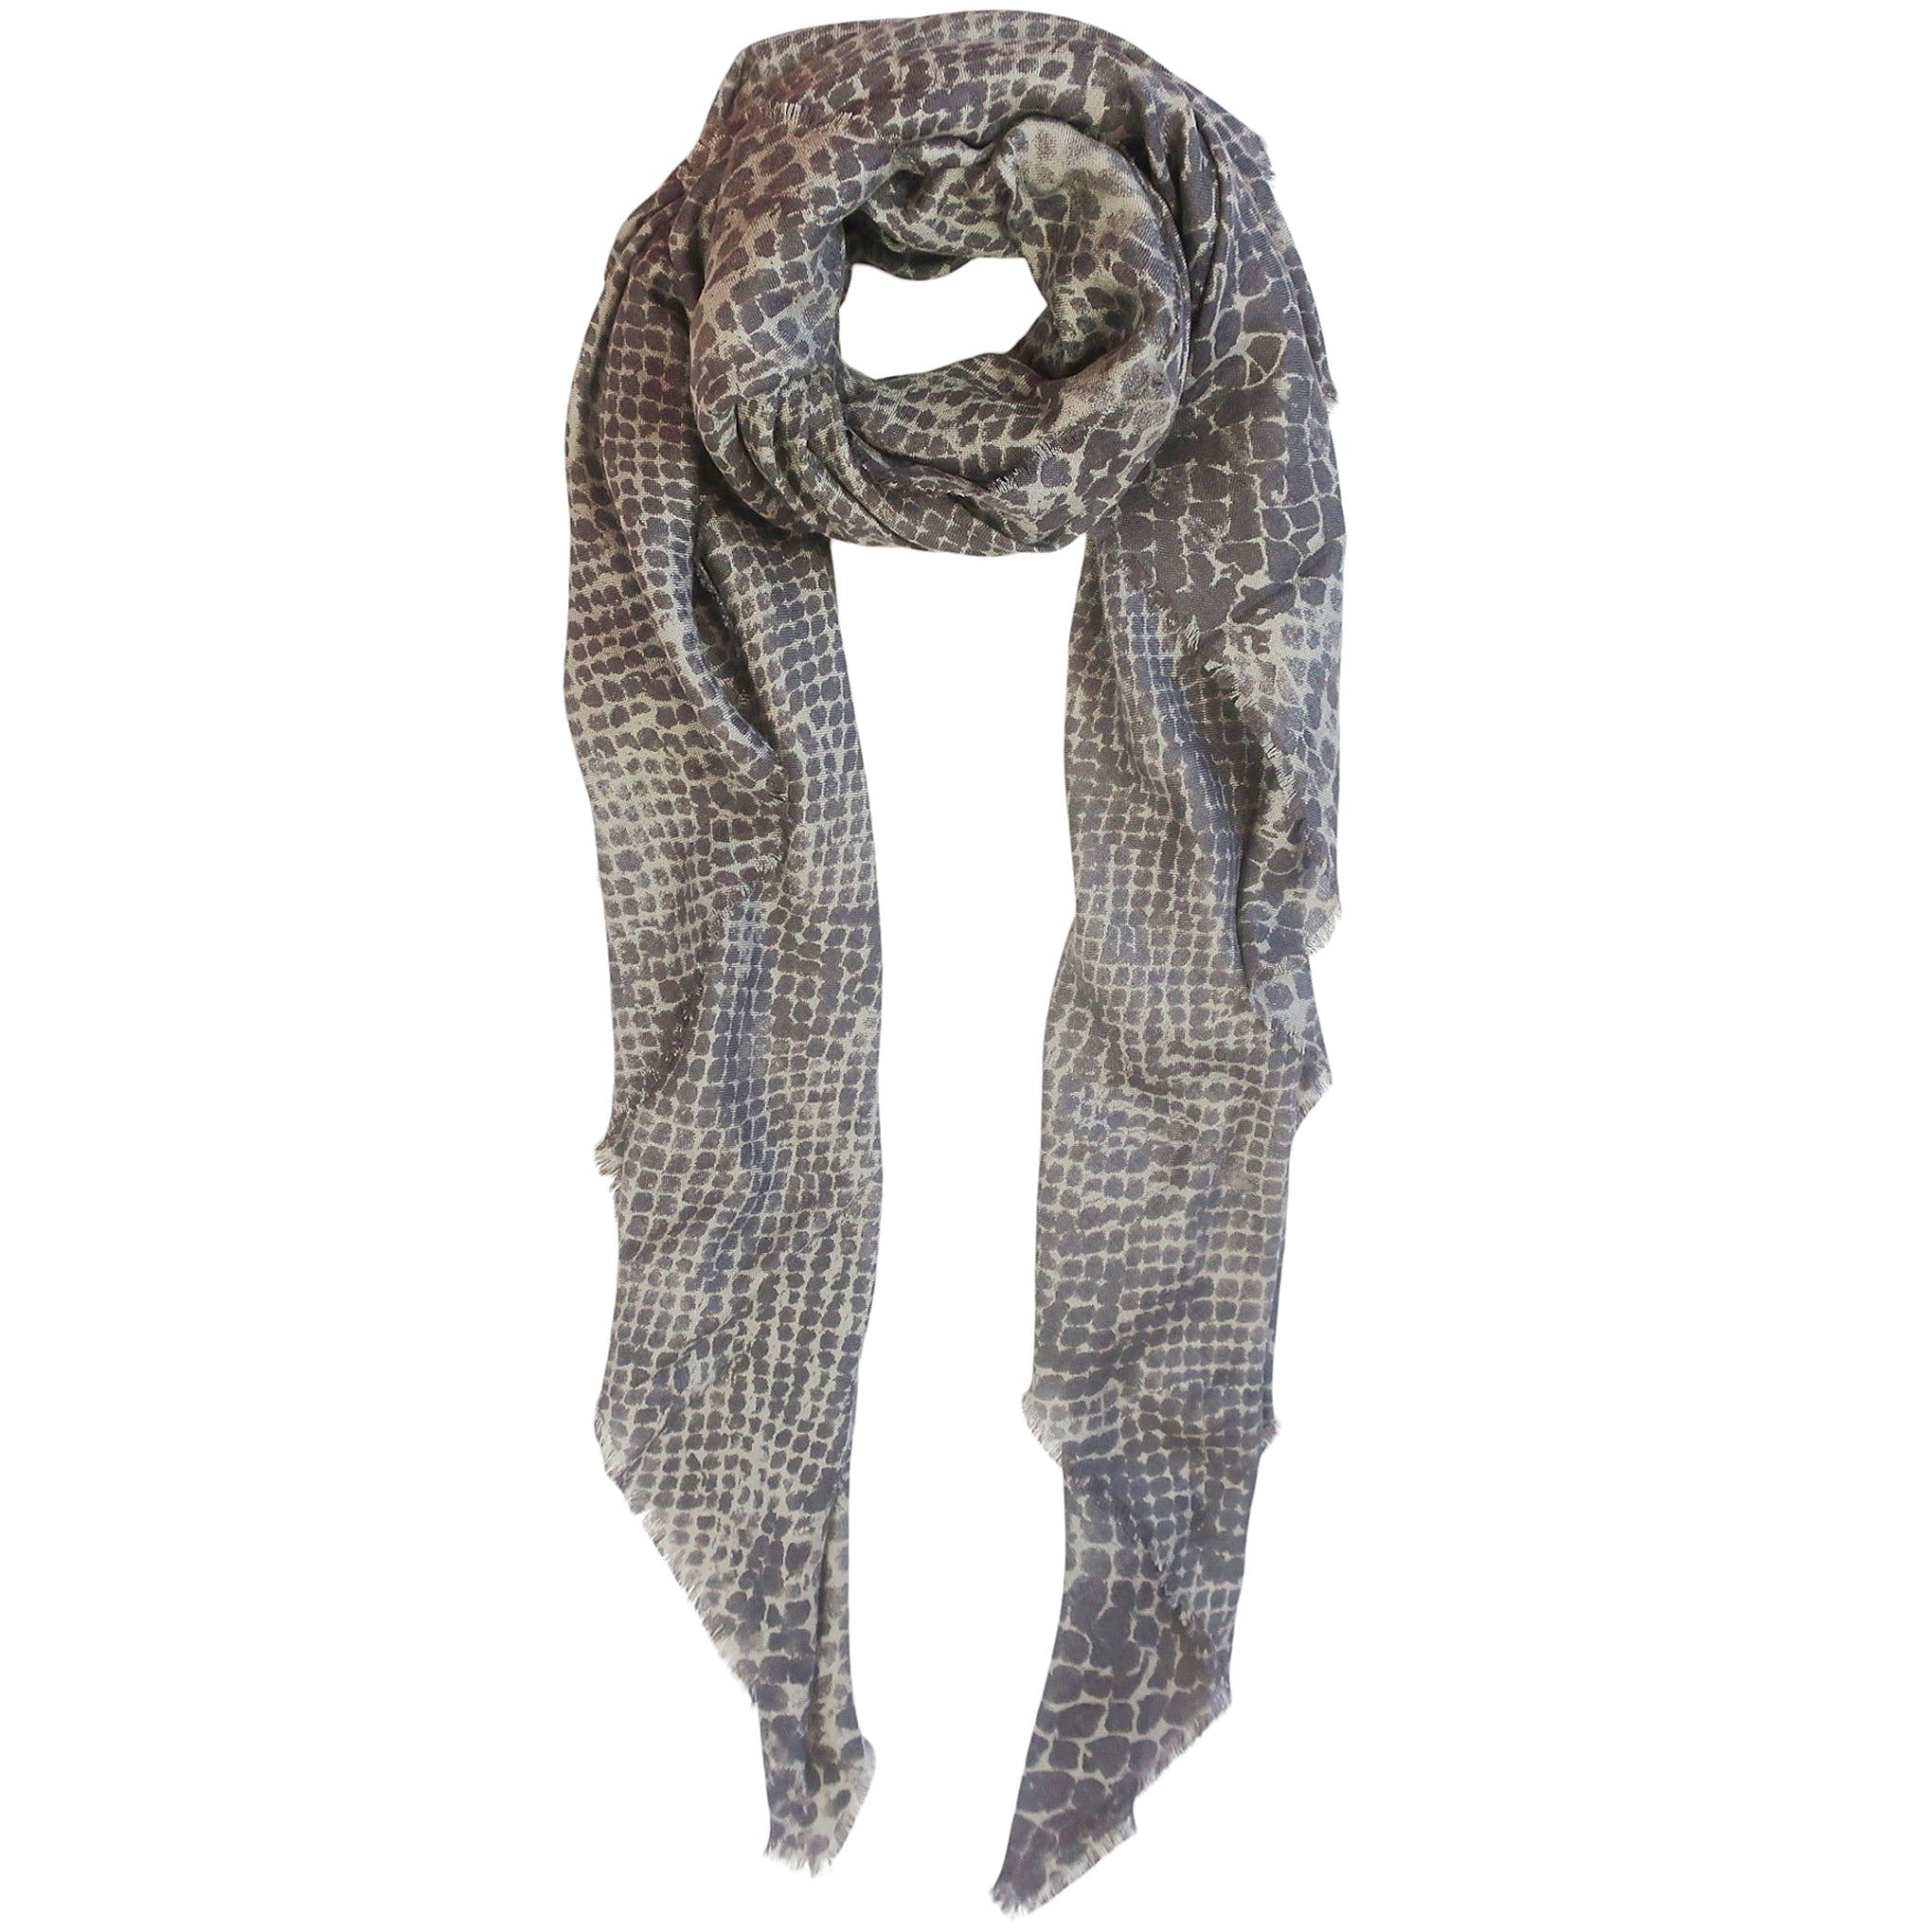 Blue Pacific Tissue Solid Modal and Cashmere Scarf Shawl in Snake Animal Print